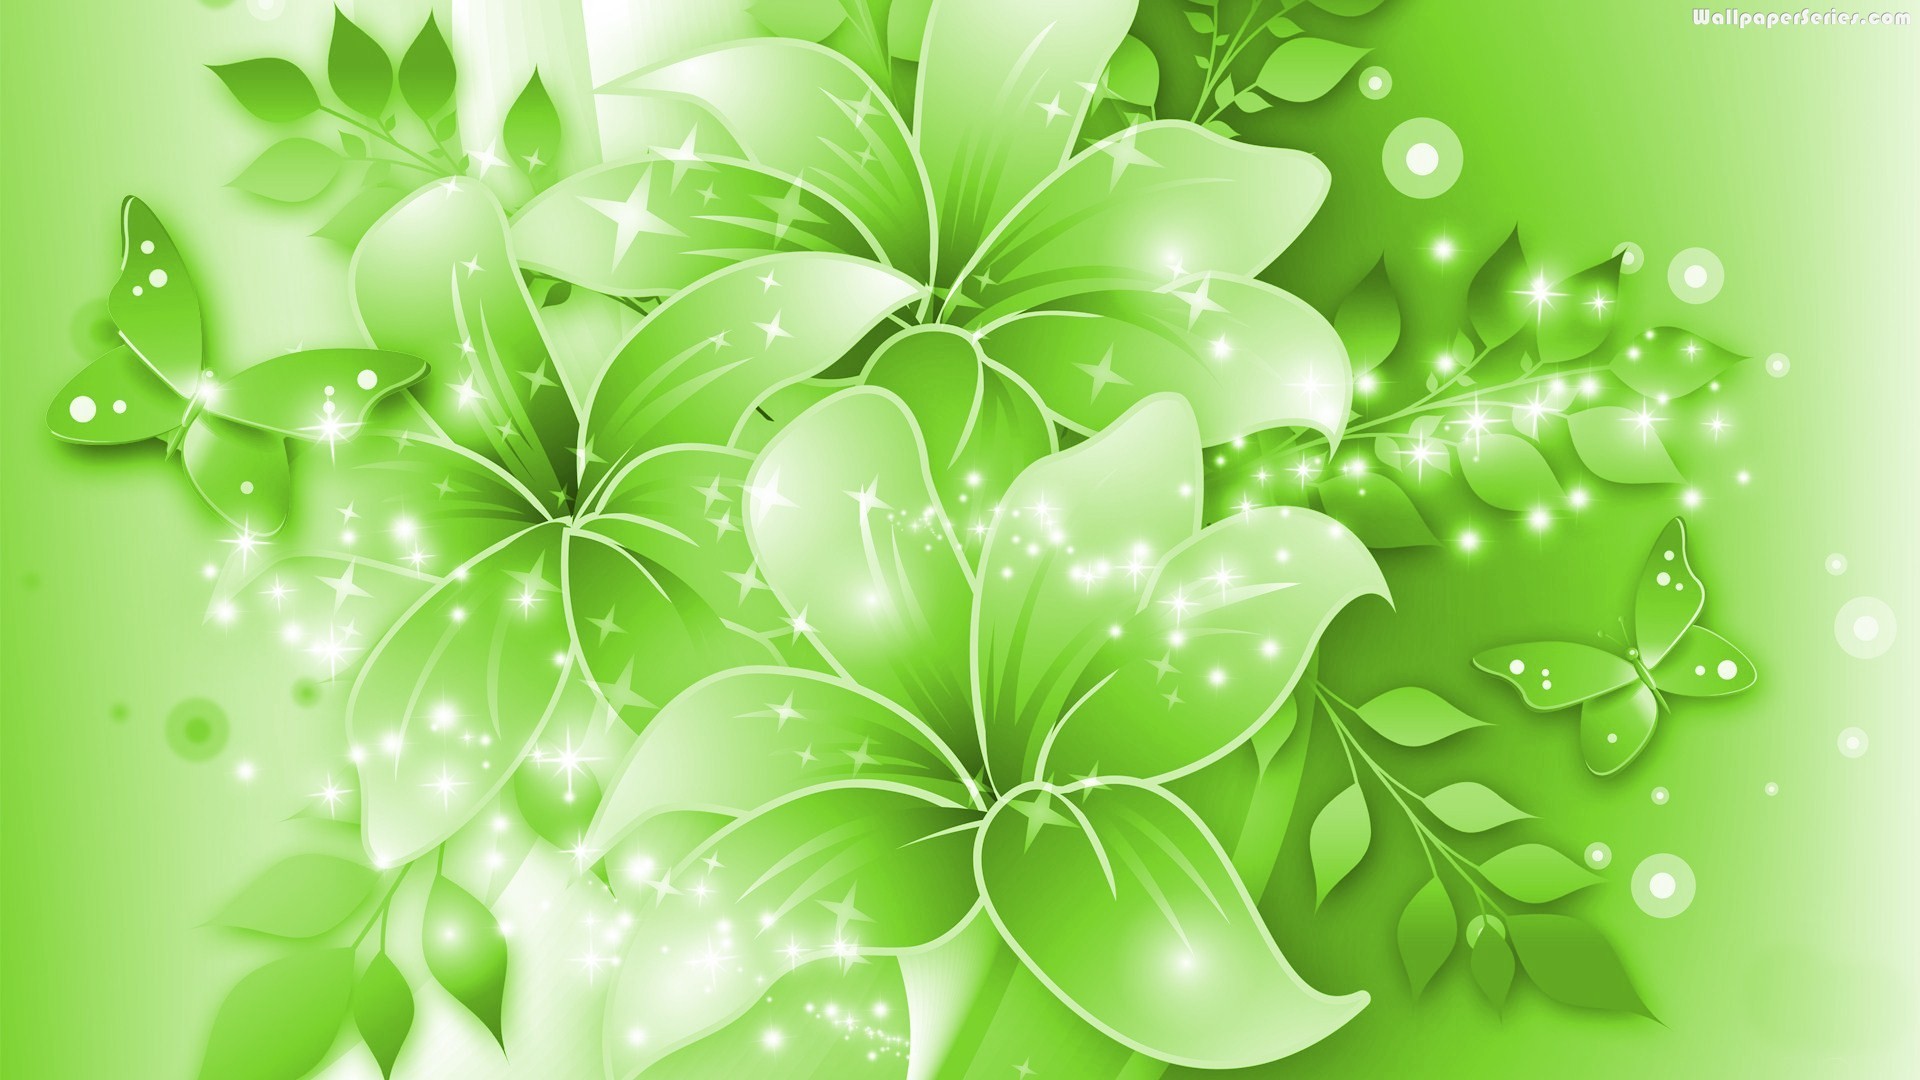 1920x1080 animated green flower image